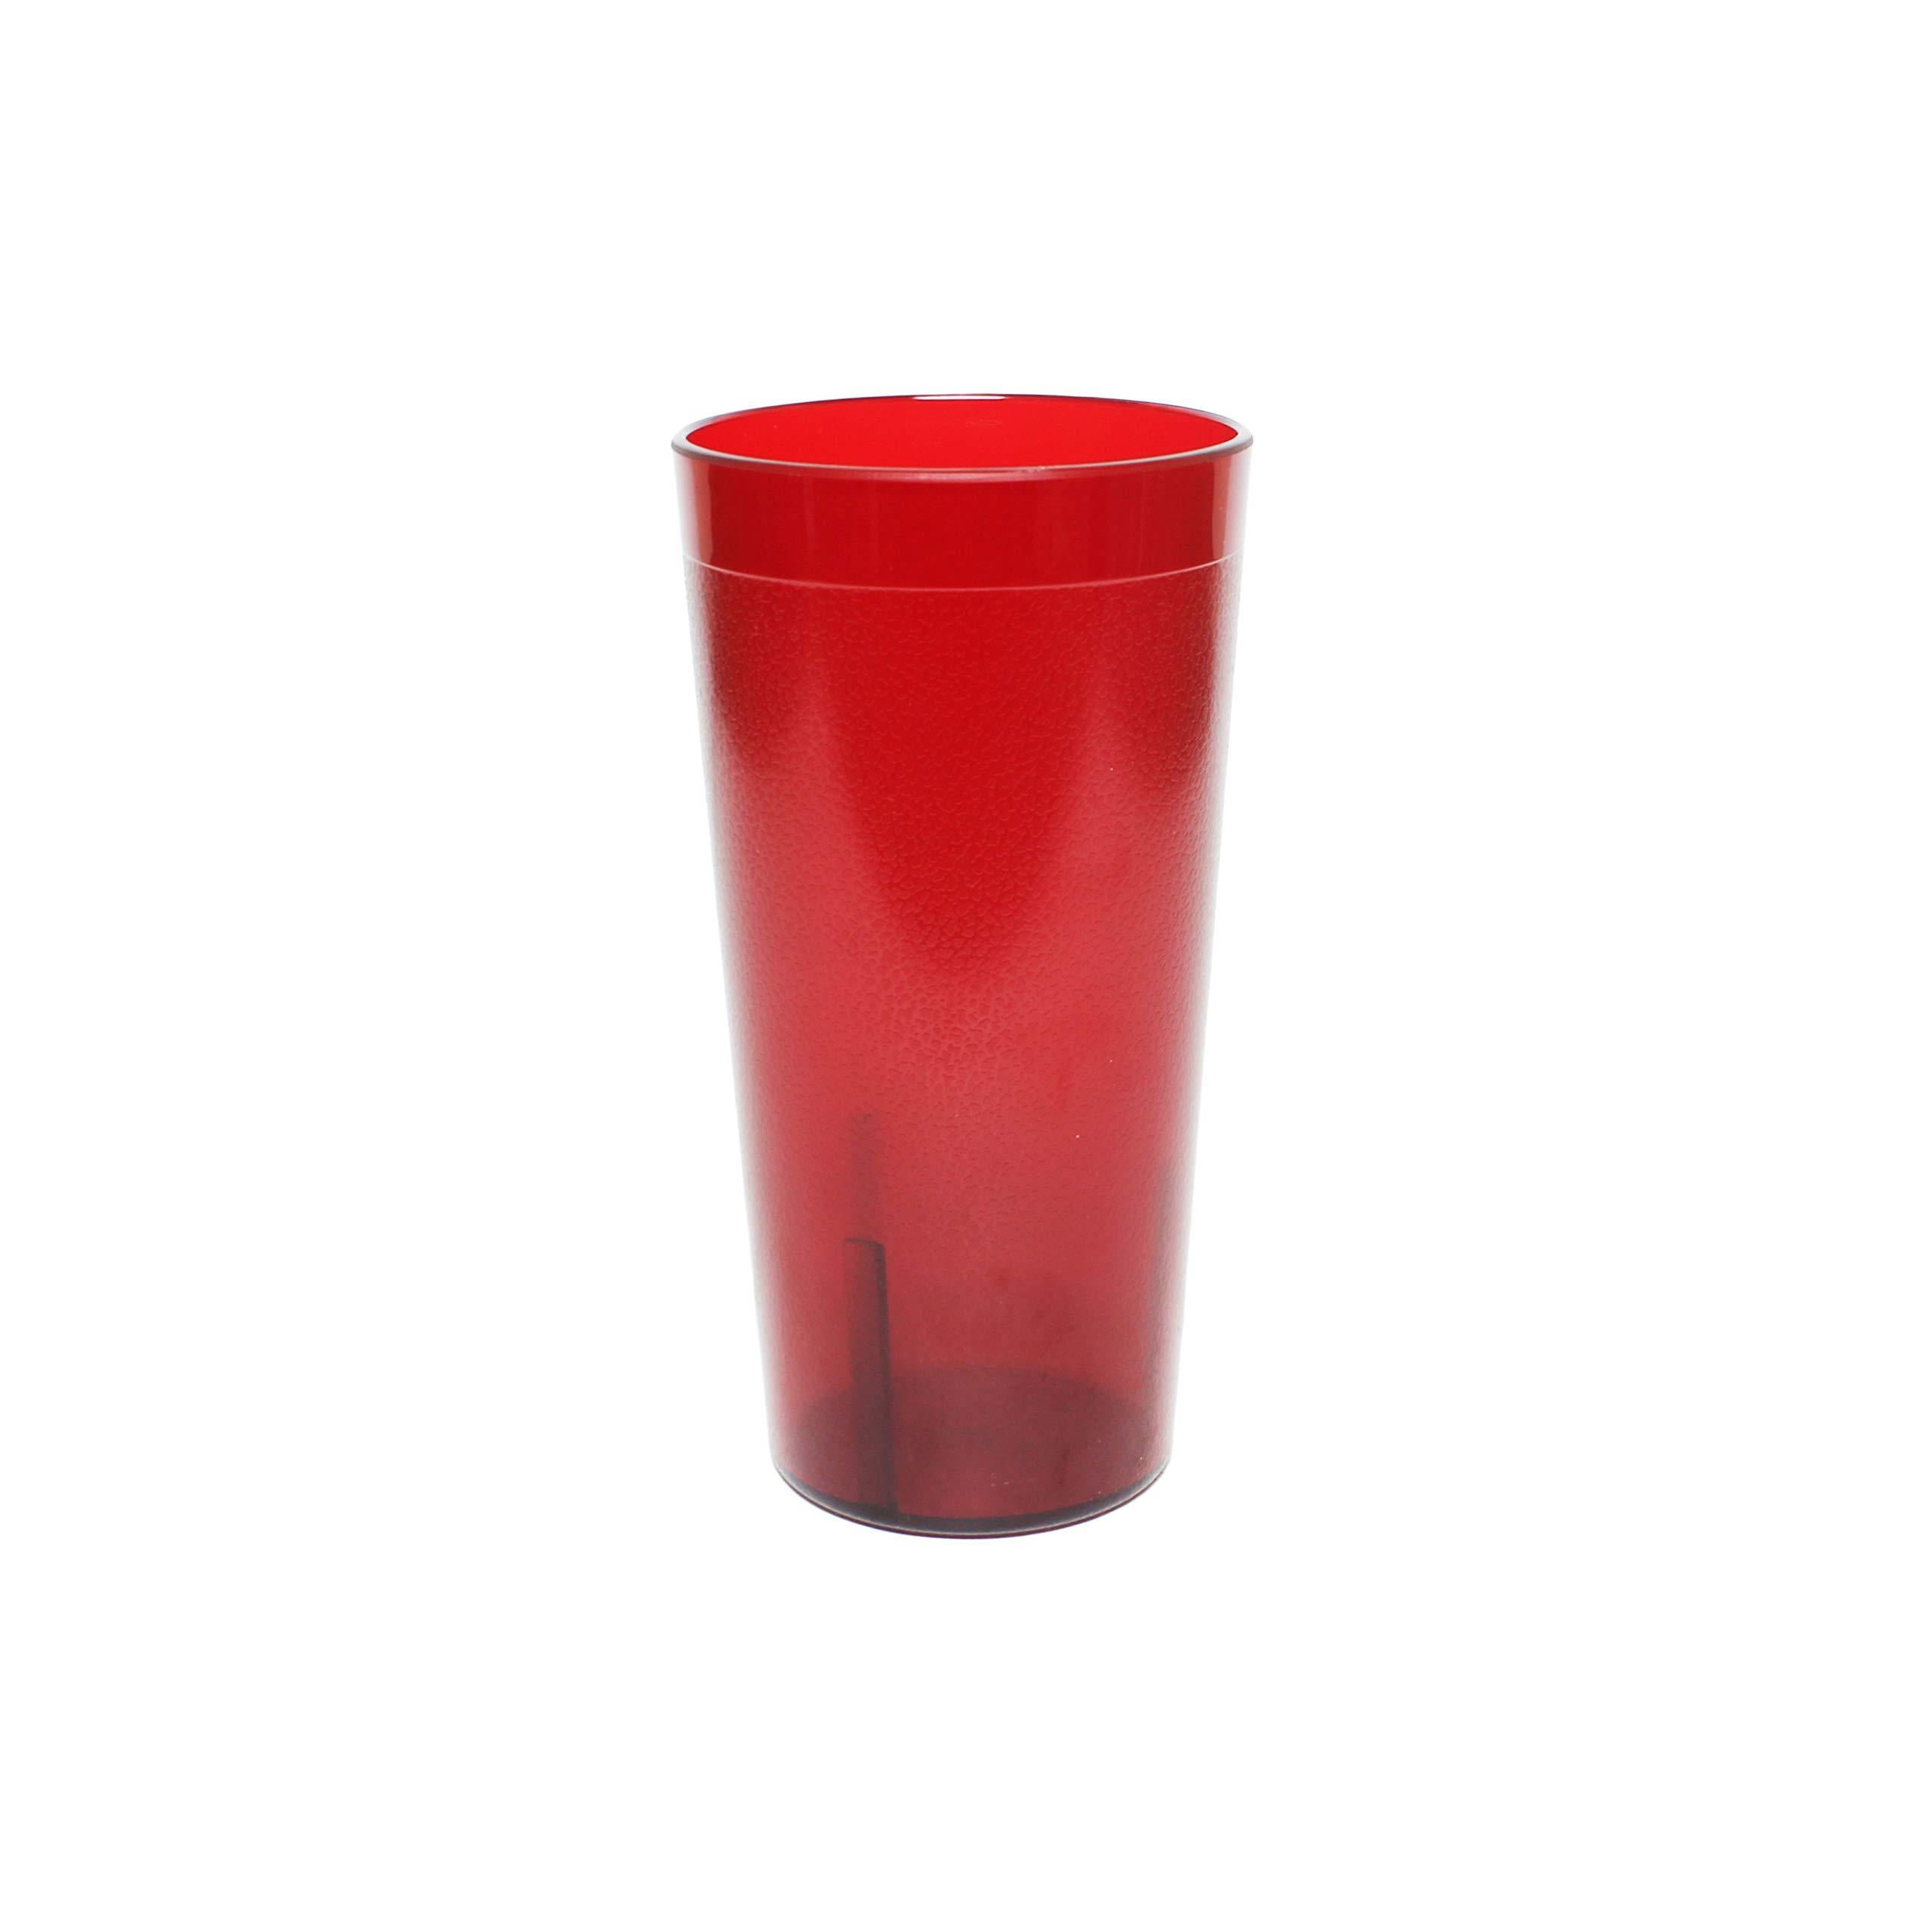 NEW, 20 oz. Restaurant Tumbler Beverage Cup, Stackable Cups, Break-Resistant Commmerical Plastic, Set of 6 - Ruby Red